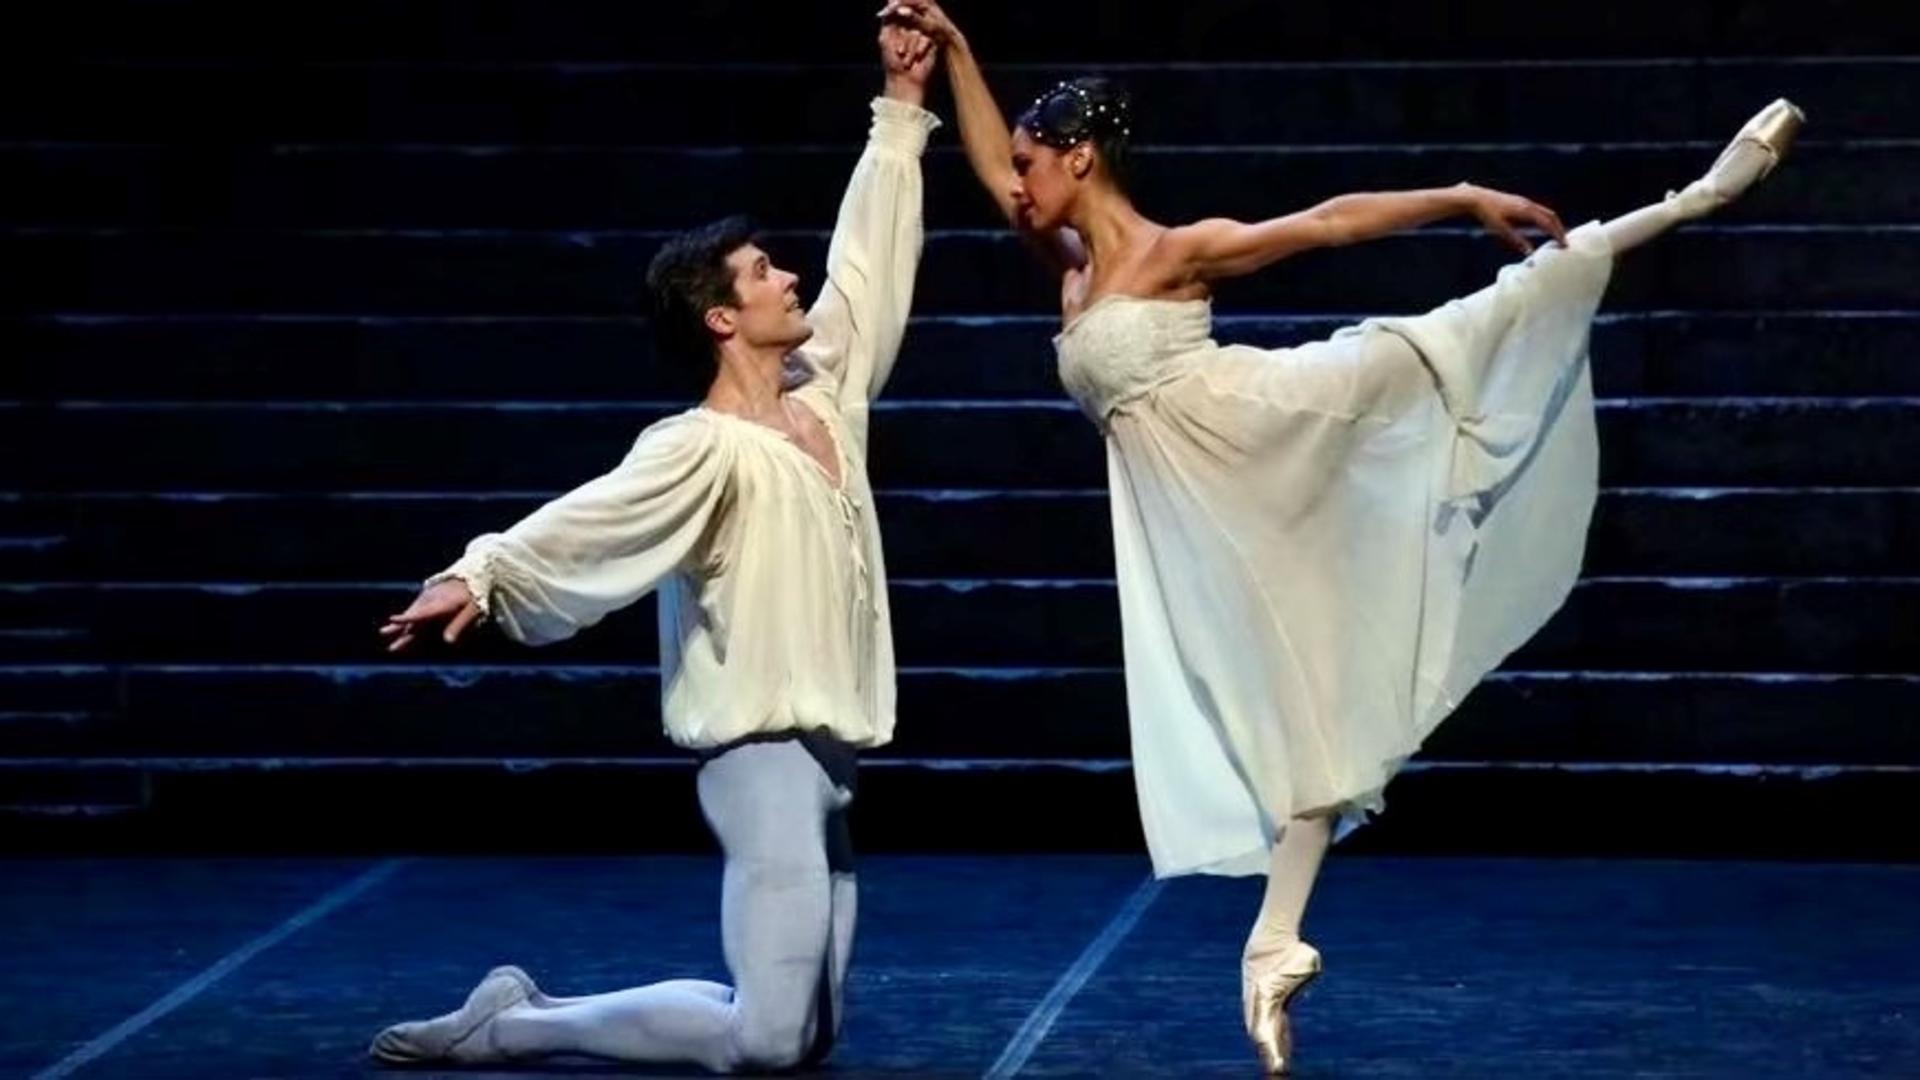 Romeo & Juliet at La Scala with Misty Copeland and Roberto Bolle (Ballet)